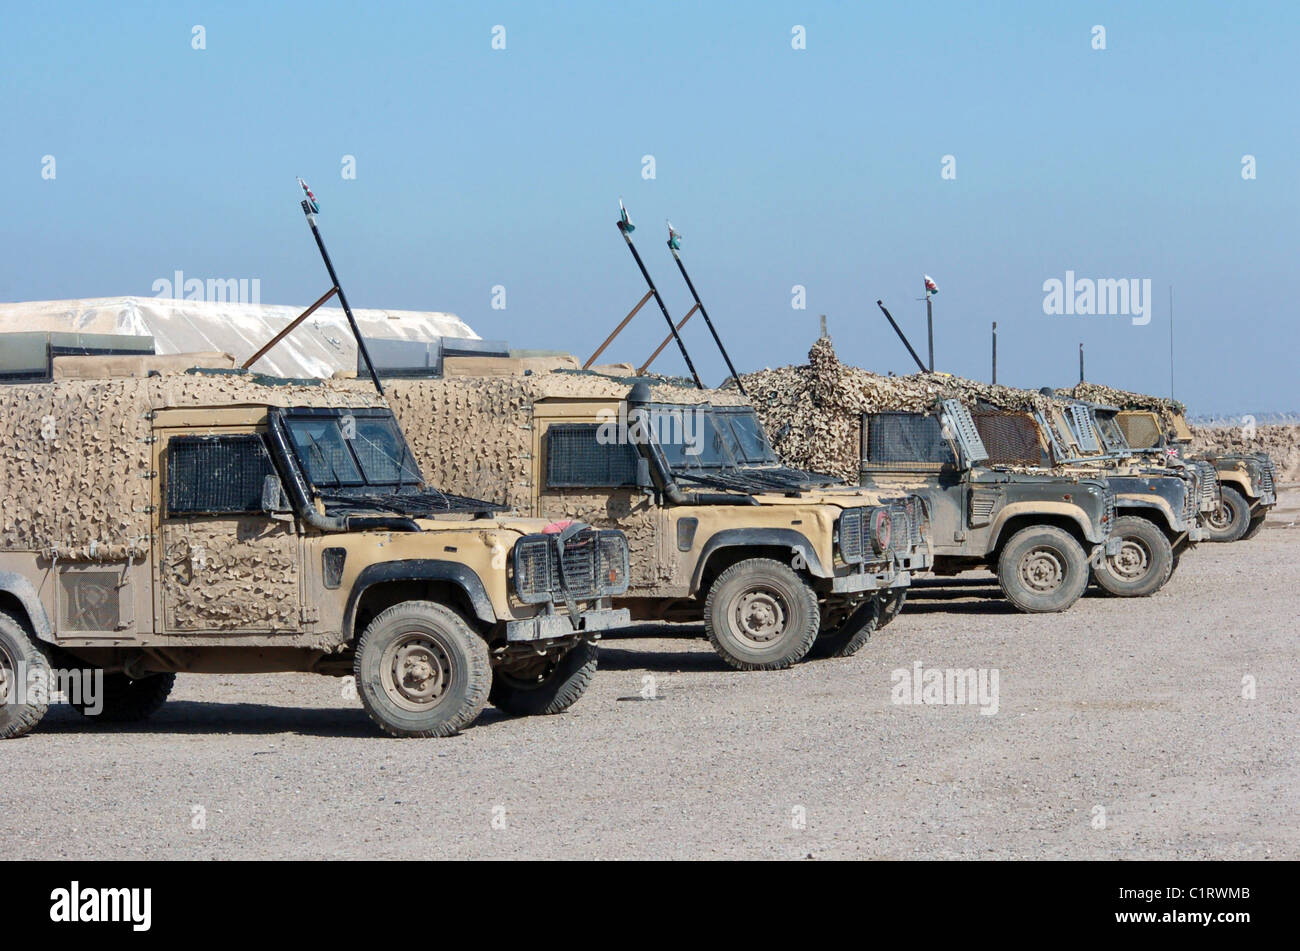 Camp Condor, Iraq - A group of Snatch Land Rover patrol vehicles used by the British Army. Stock Photo